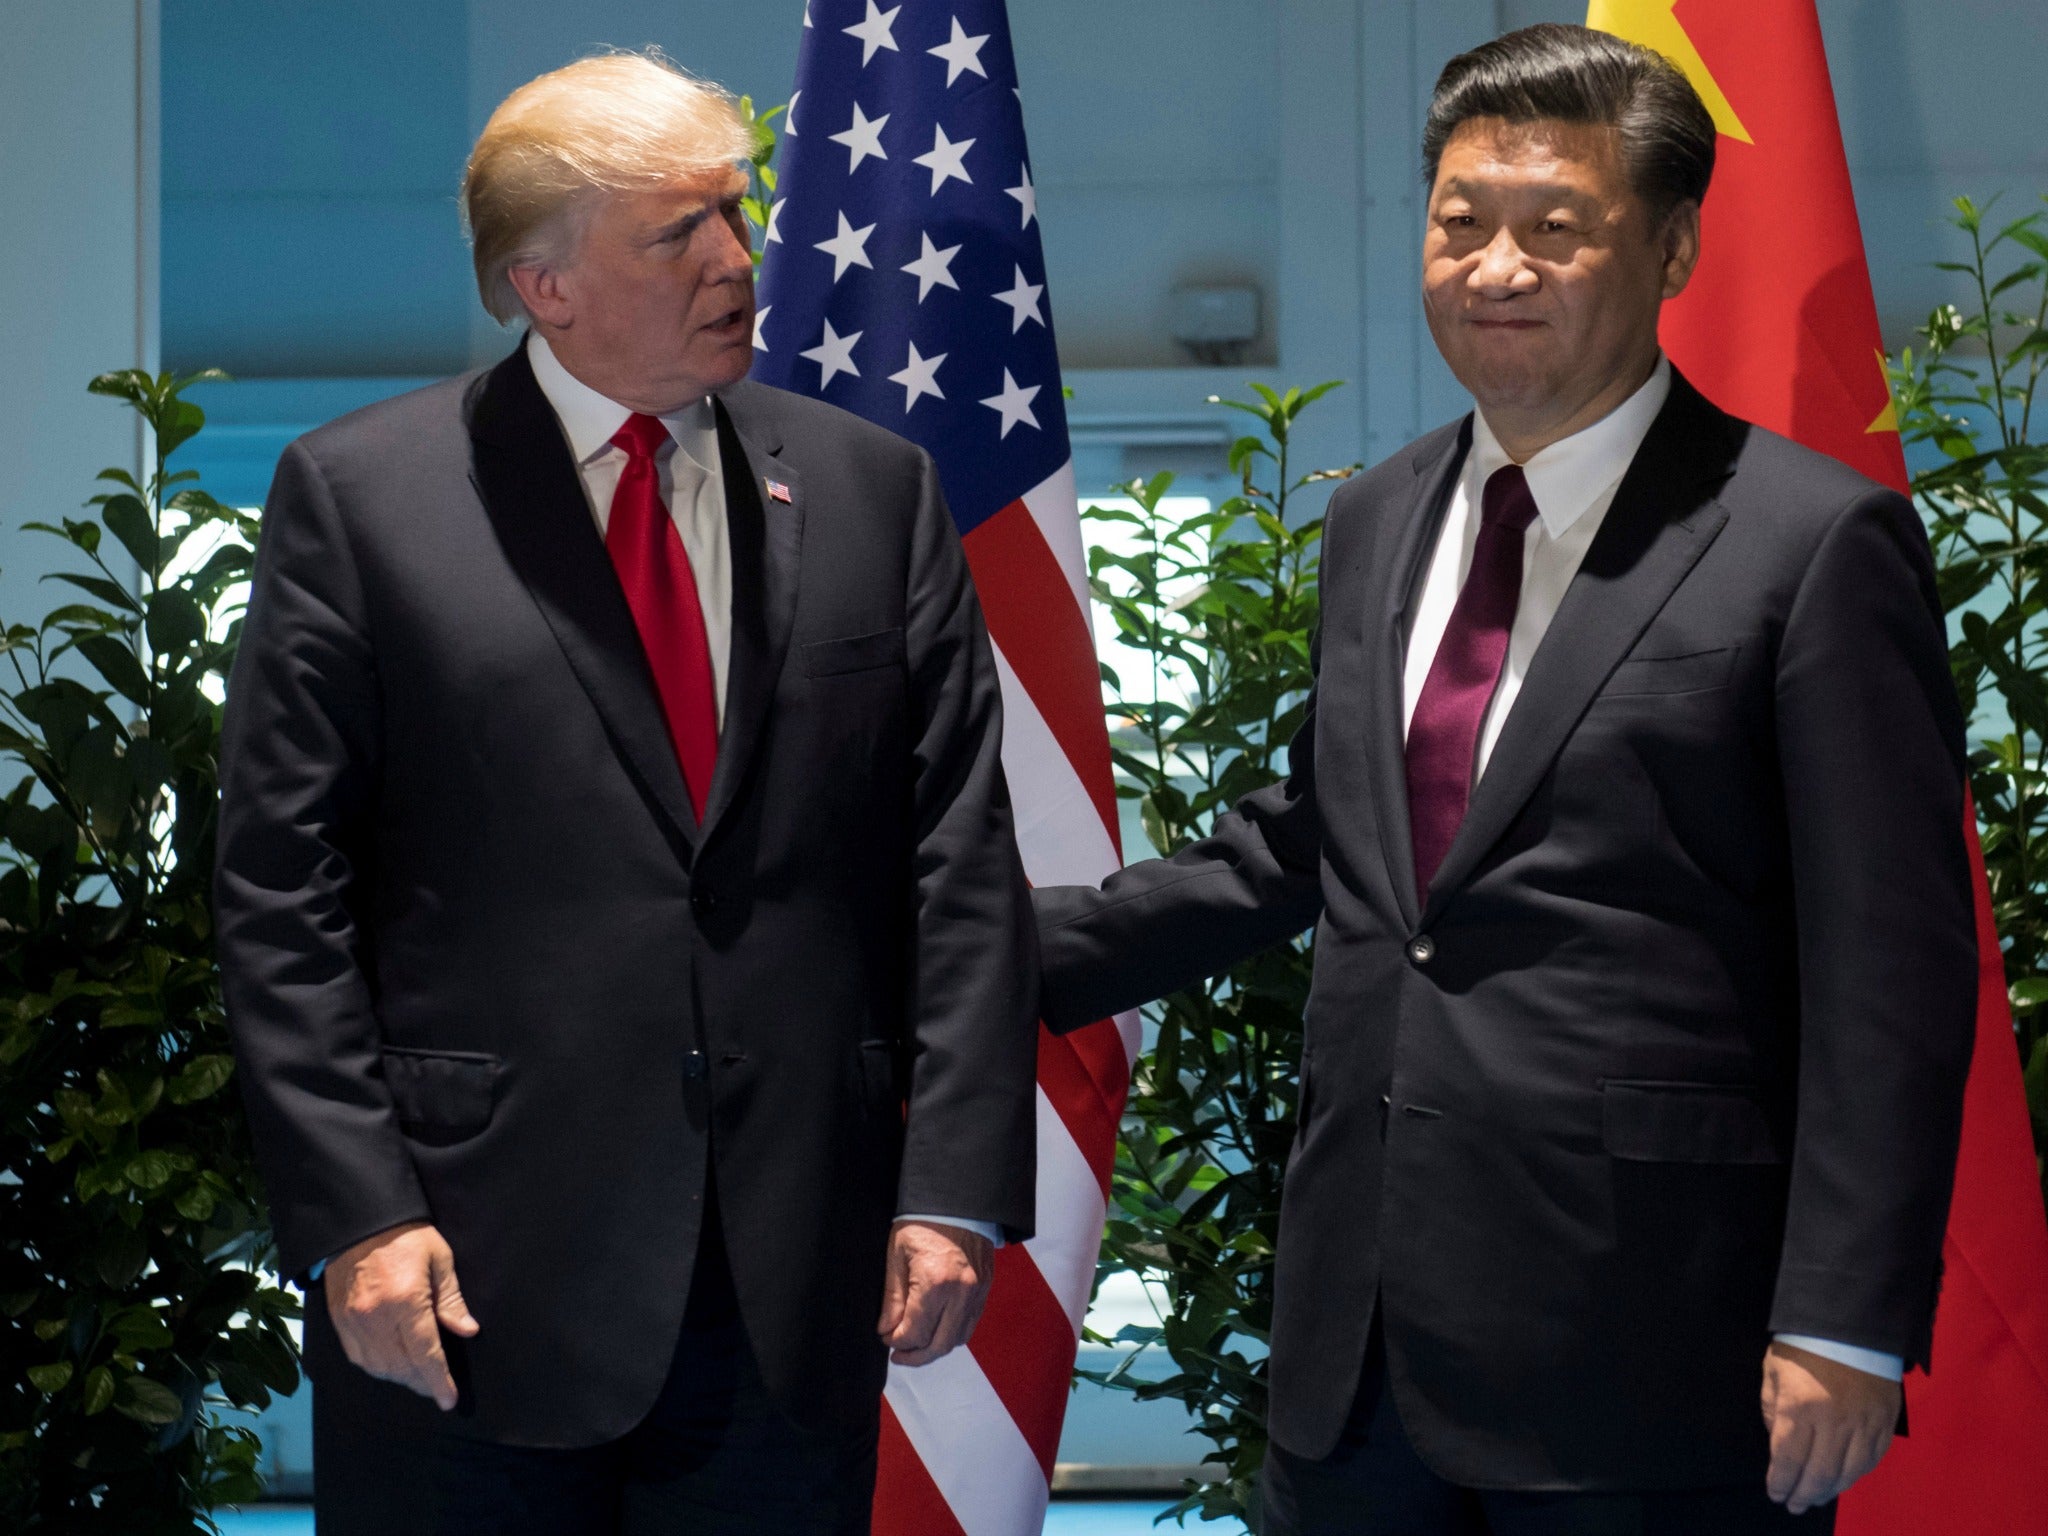 U.S. President Donald Trump and Chinese President Xi Jinping, seen here at the G20 Summit in Hamburg, Germany on July 8, 2017, discussed options for containing the North Korean threat